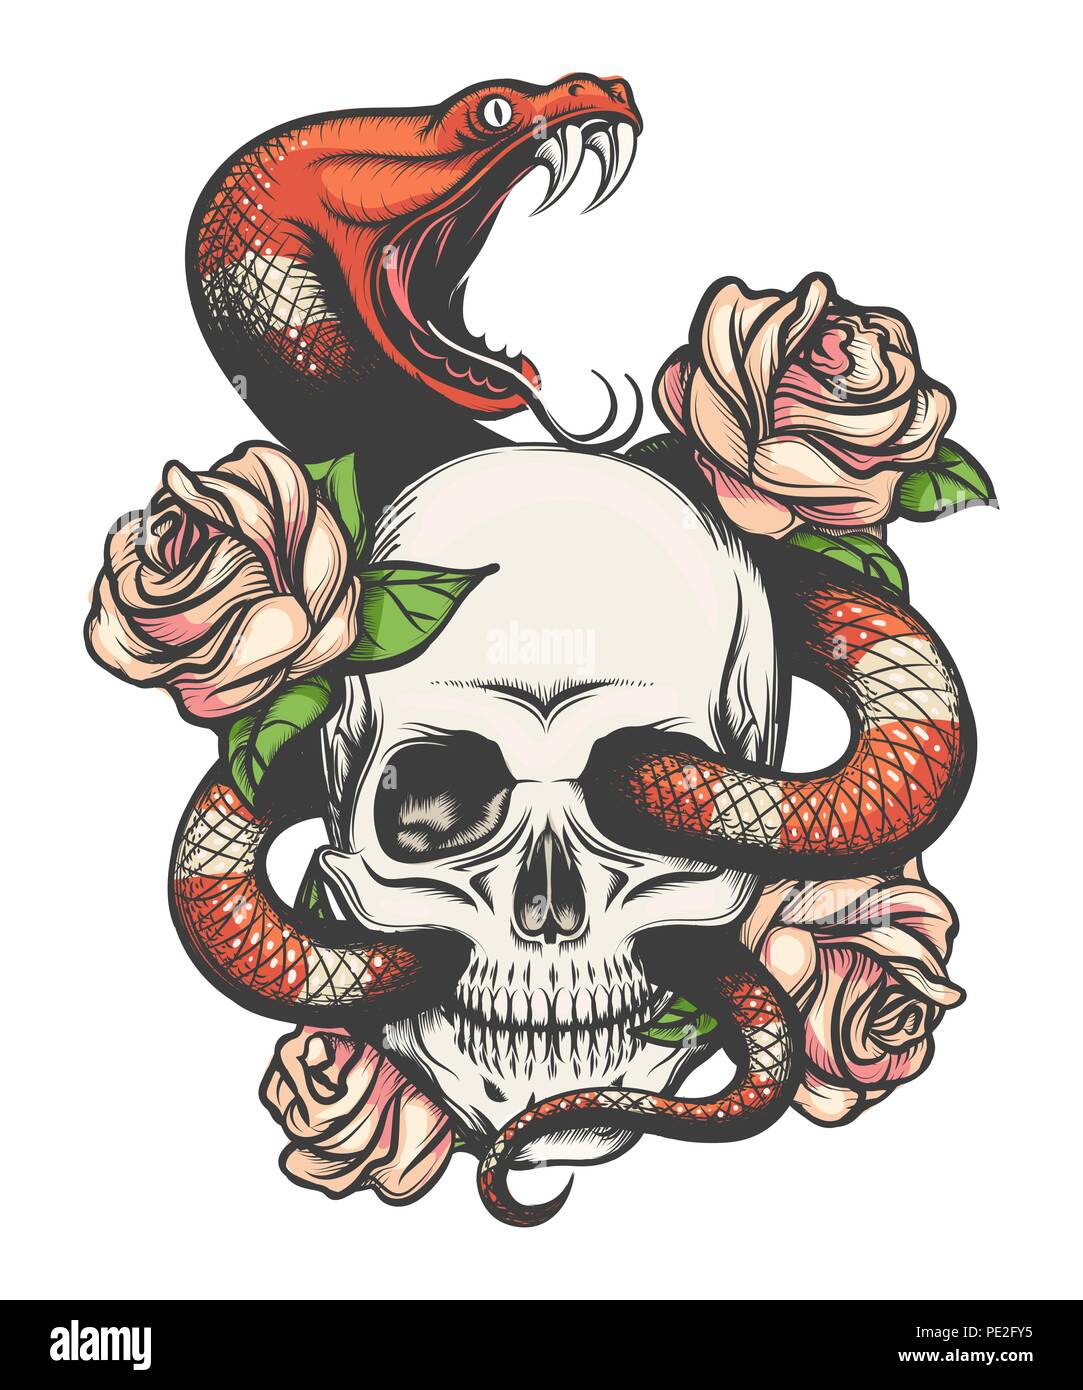 Colorful Tattoo design with skull, roses and snake. Vector illustration. Stock Vector